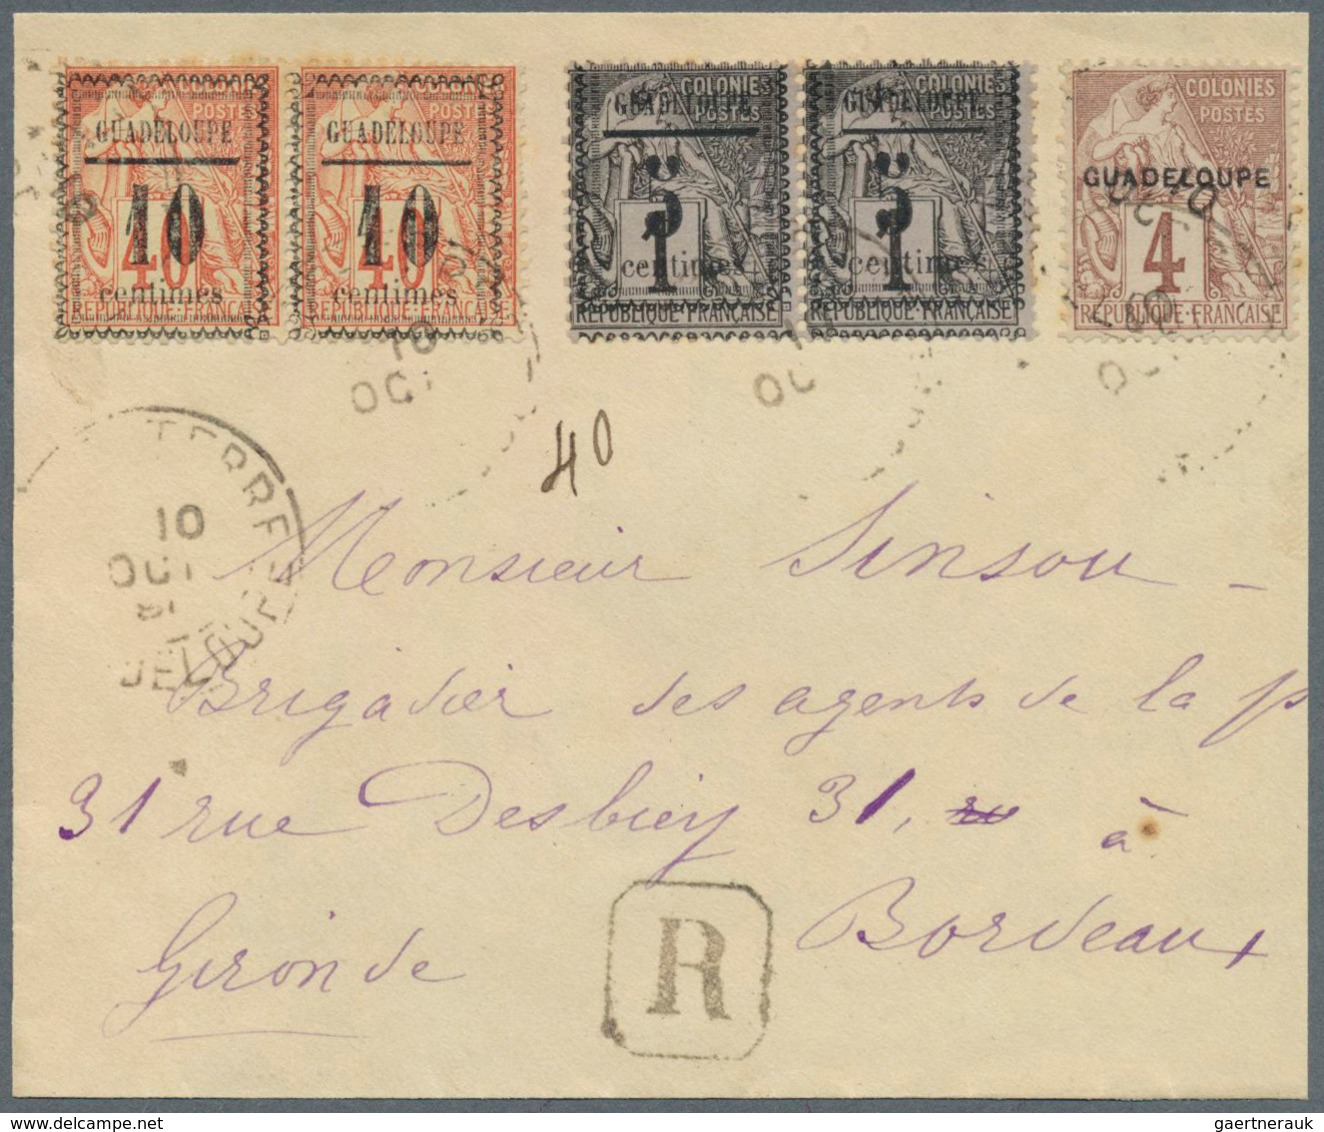 22638 Guadeloupe: 1837/1913, collection of apprx. 90 entires from a nice selection of pre-philatelic/stamp